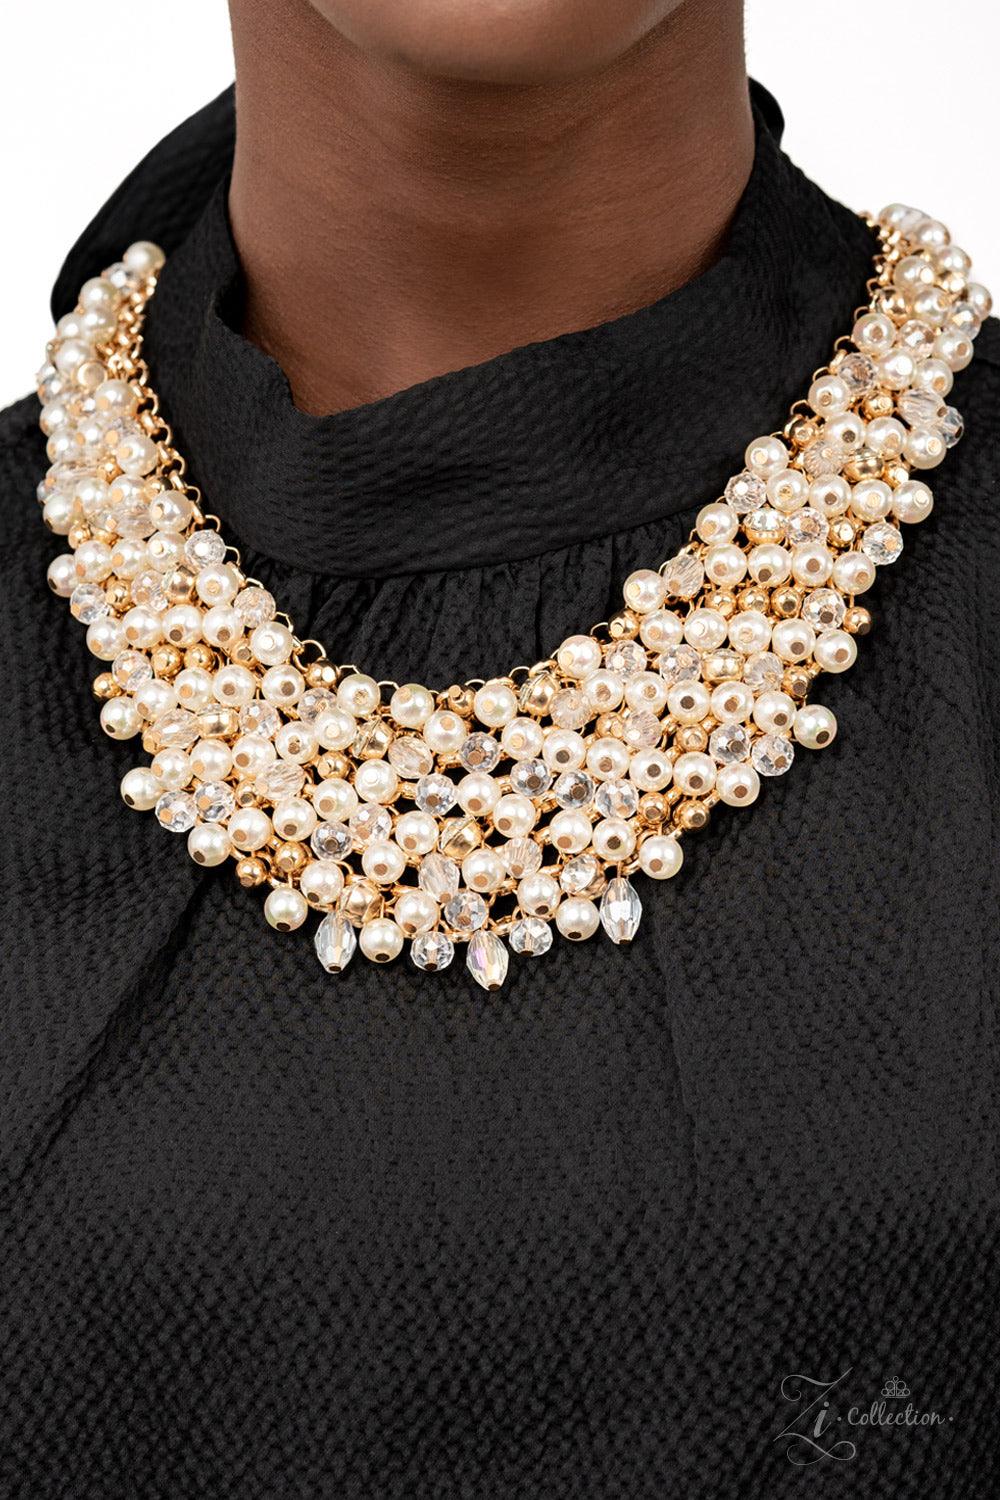 Paparazzi Accessories Sentimental Mesmerizingly mismatched crystal-like beads, white pearls, and classic white rhinestones delicately attach to a golden chain net below the collar. Jampacked with noise-making shimmer, the effervescently clustered fringe d